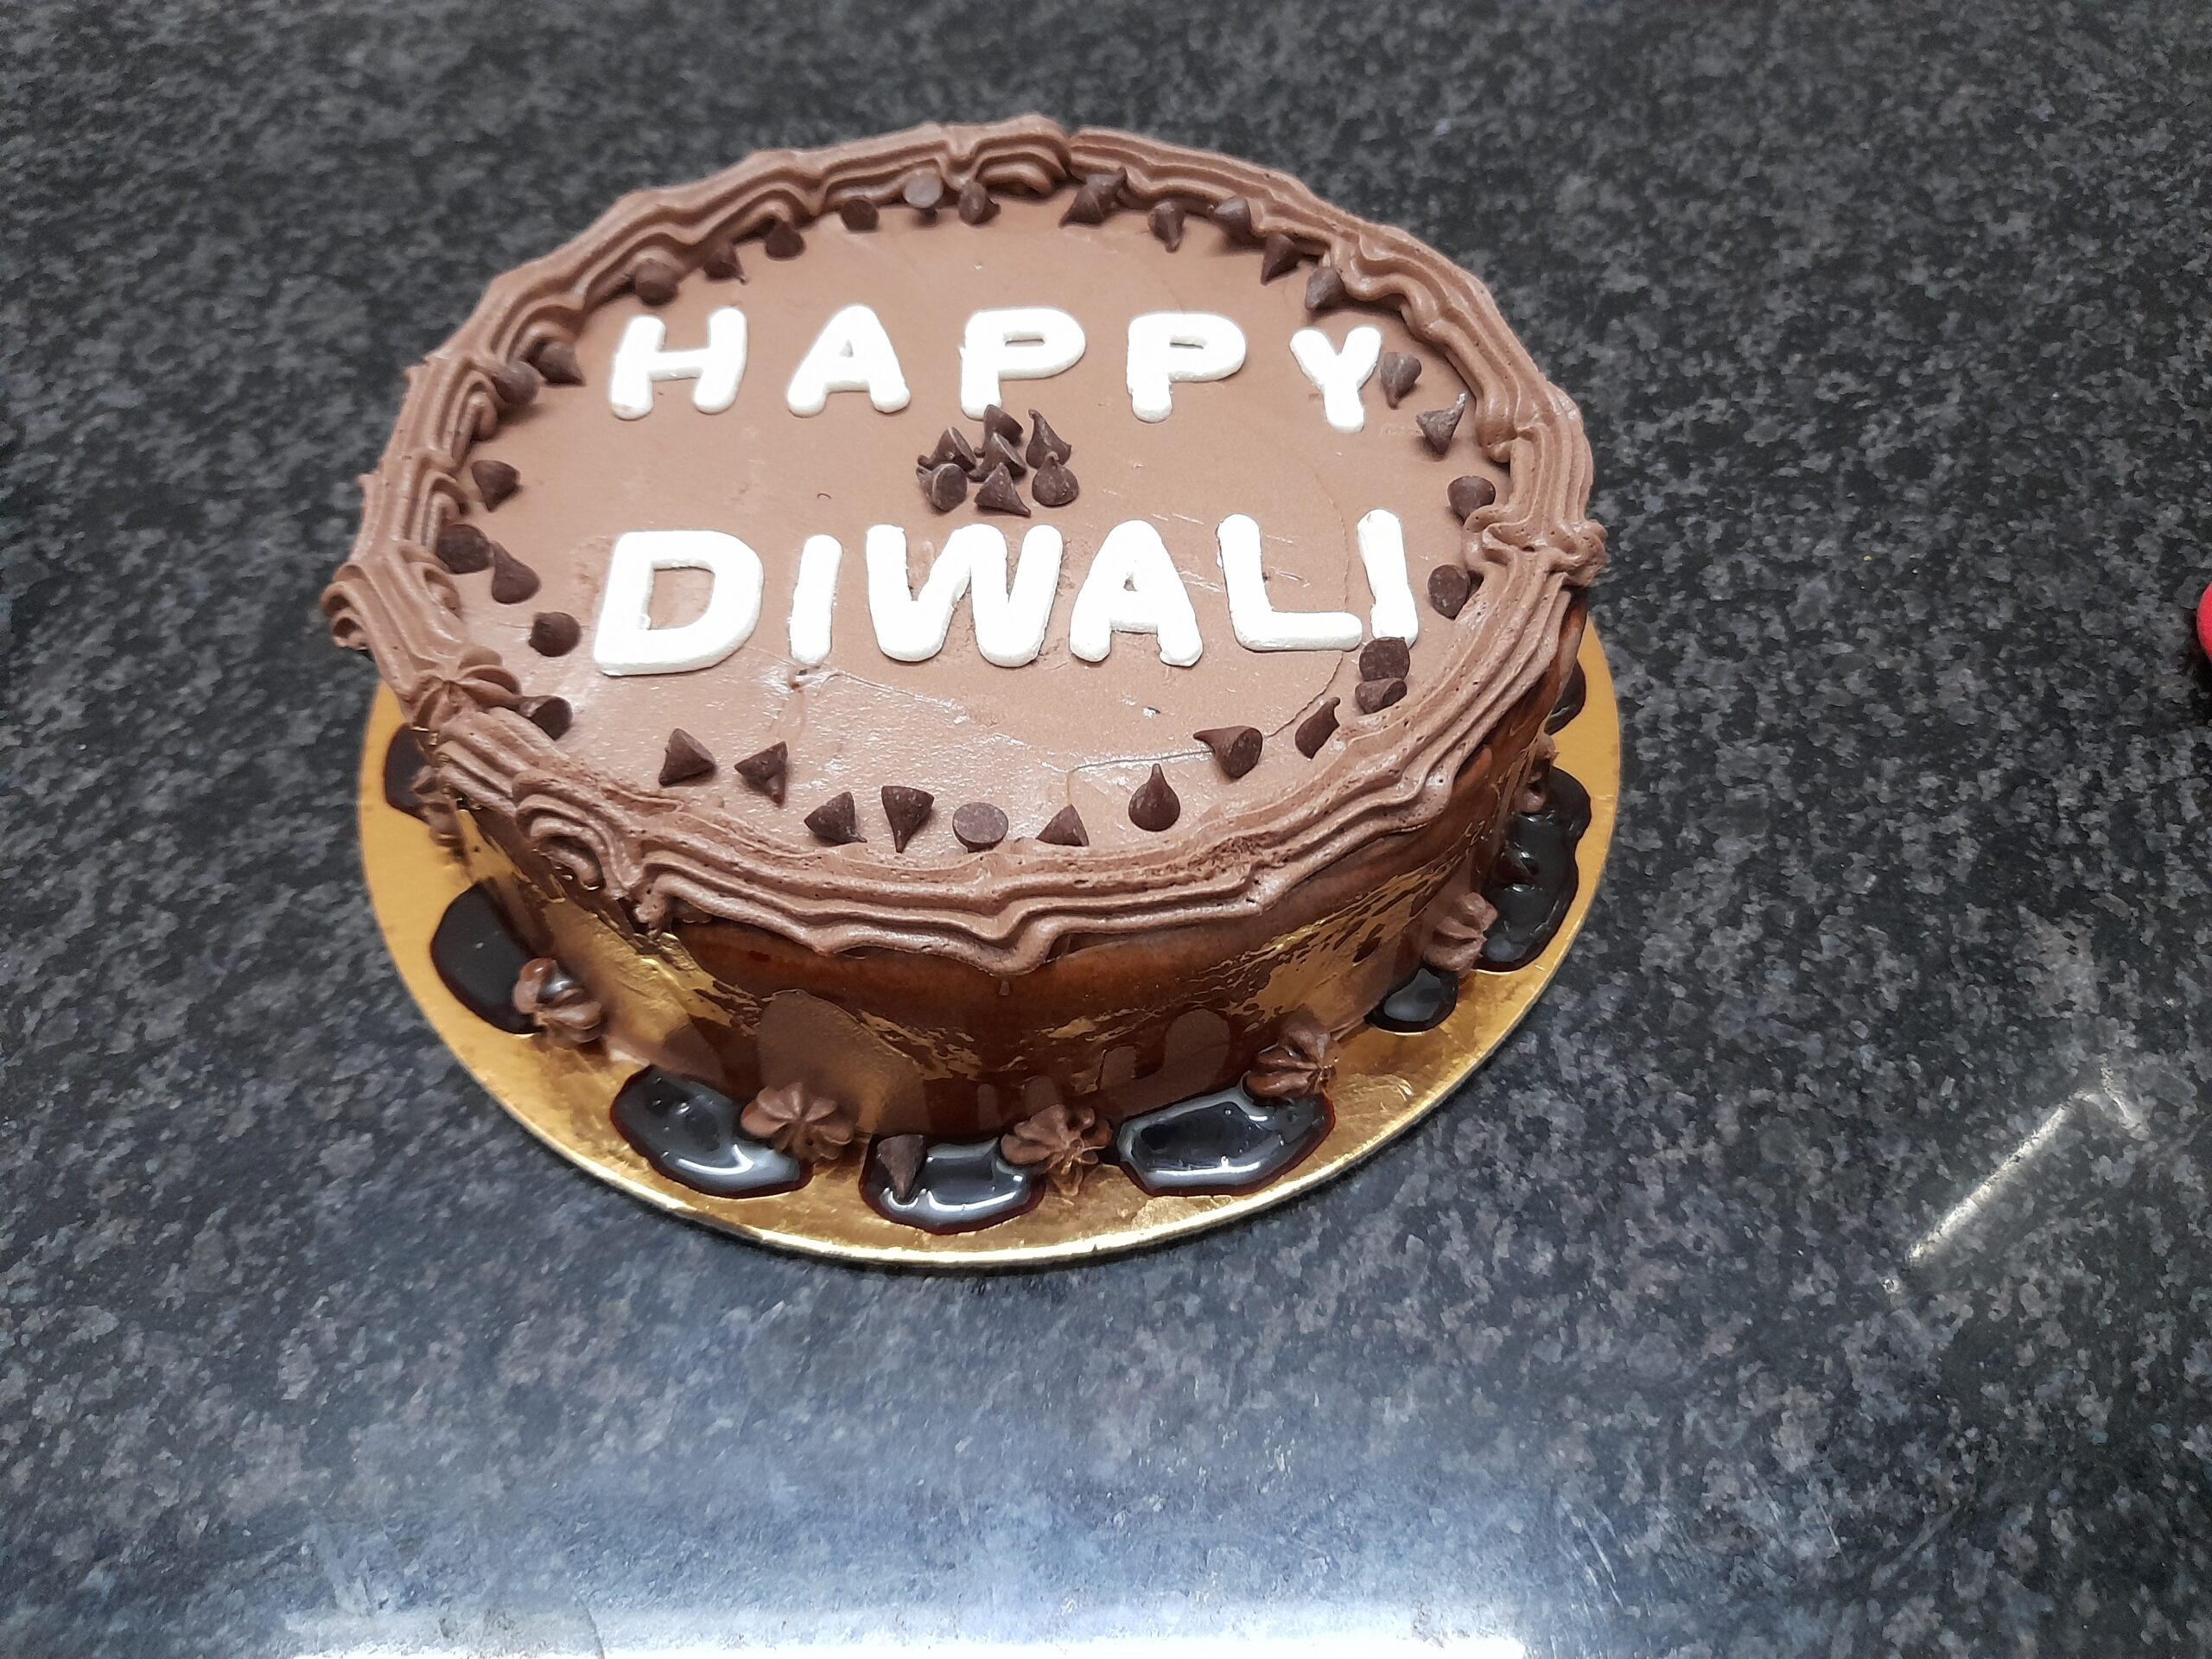 Bigwishbox Special Diwali Chocolate Cake 500 Gram for Friends, Family,  Relatives, Colleagues, Corporate Client | Next Day Delivery : Amazon.in:  Grocery & Gourmet Foods